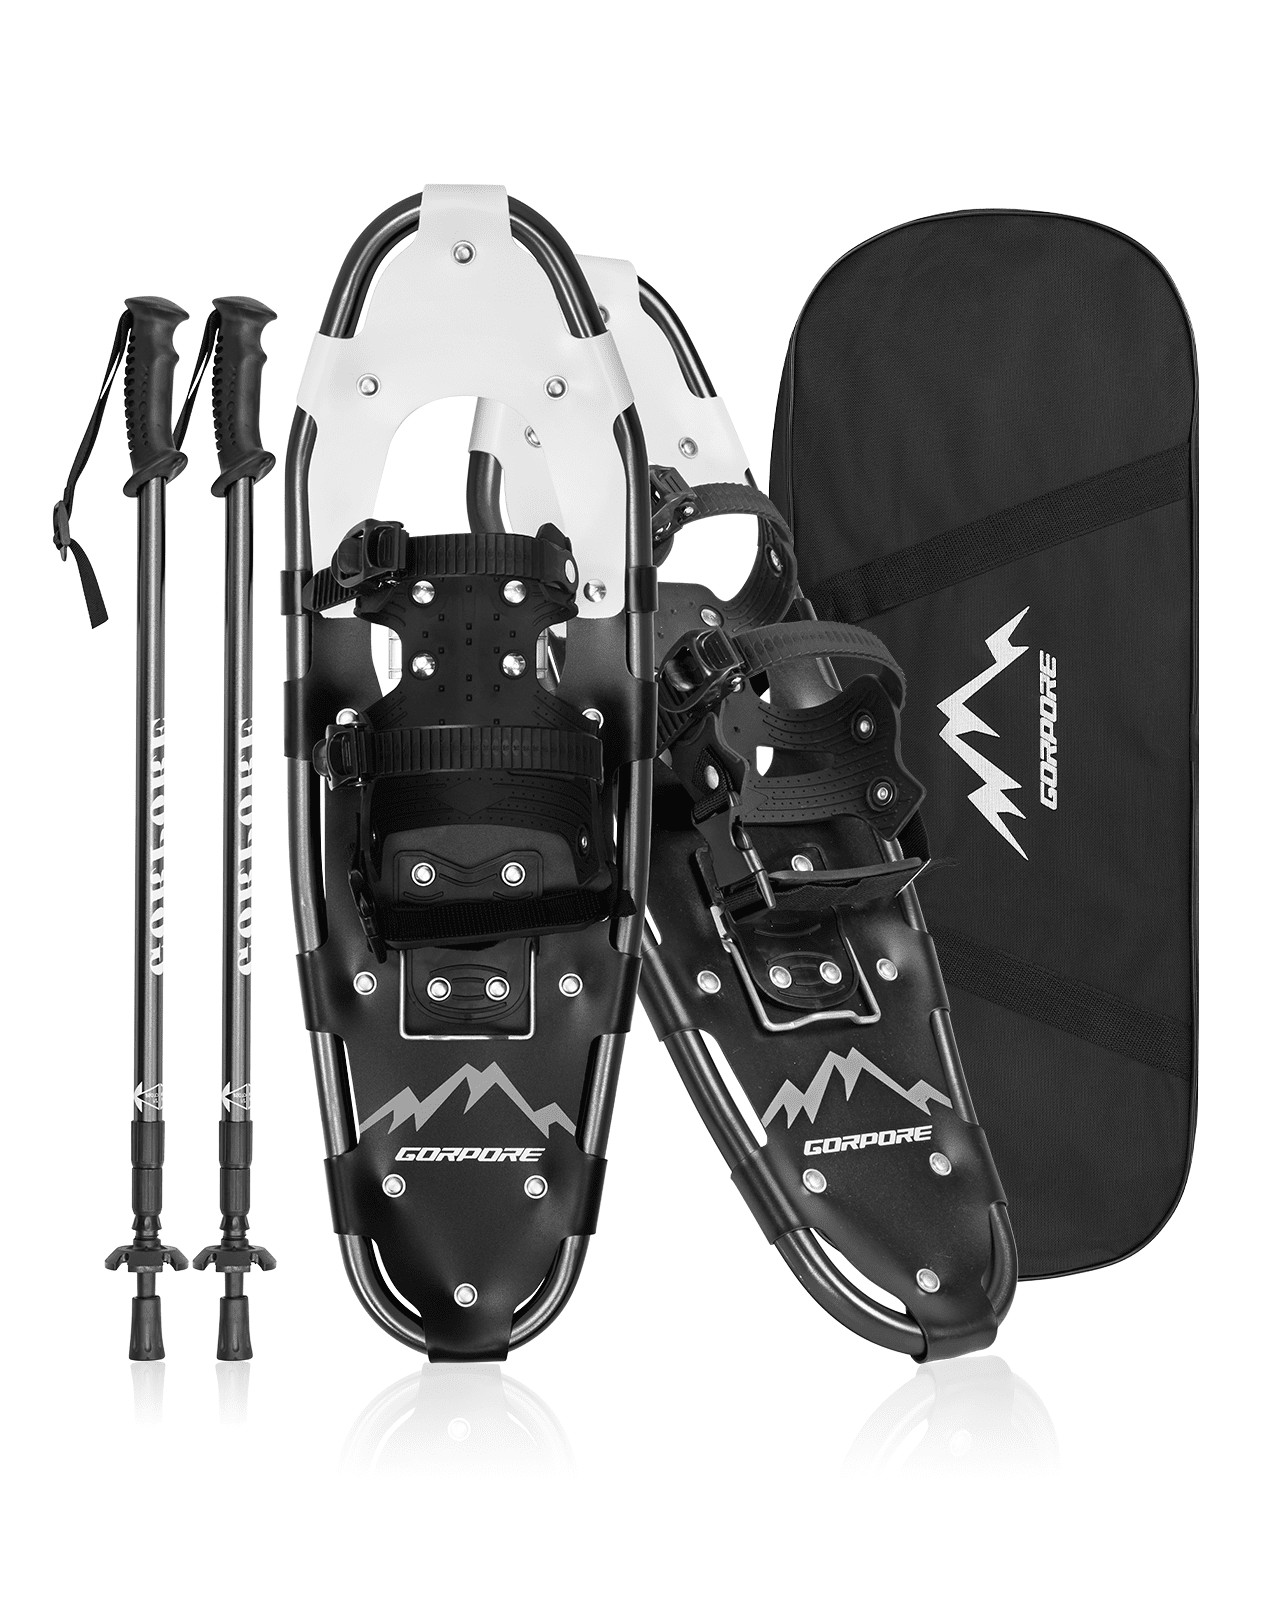 ALPS Adult All Terrian Snowshoes for Men,Women,Youth with Carry Tote Bag 22/25/27/30 